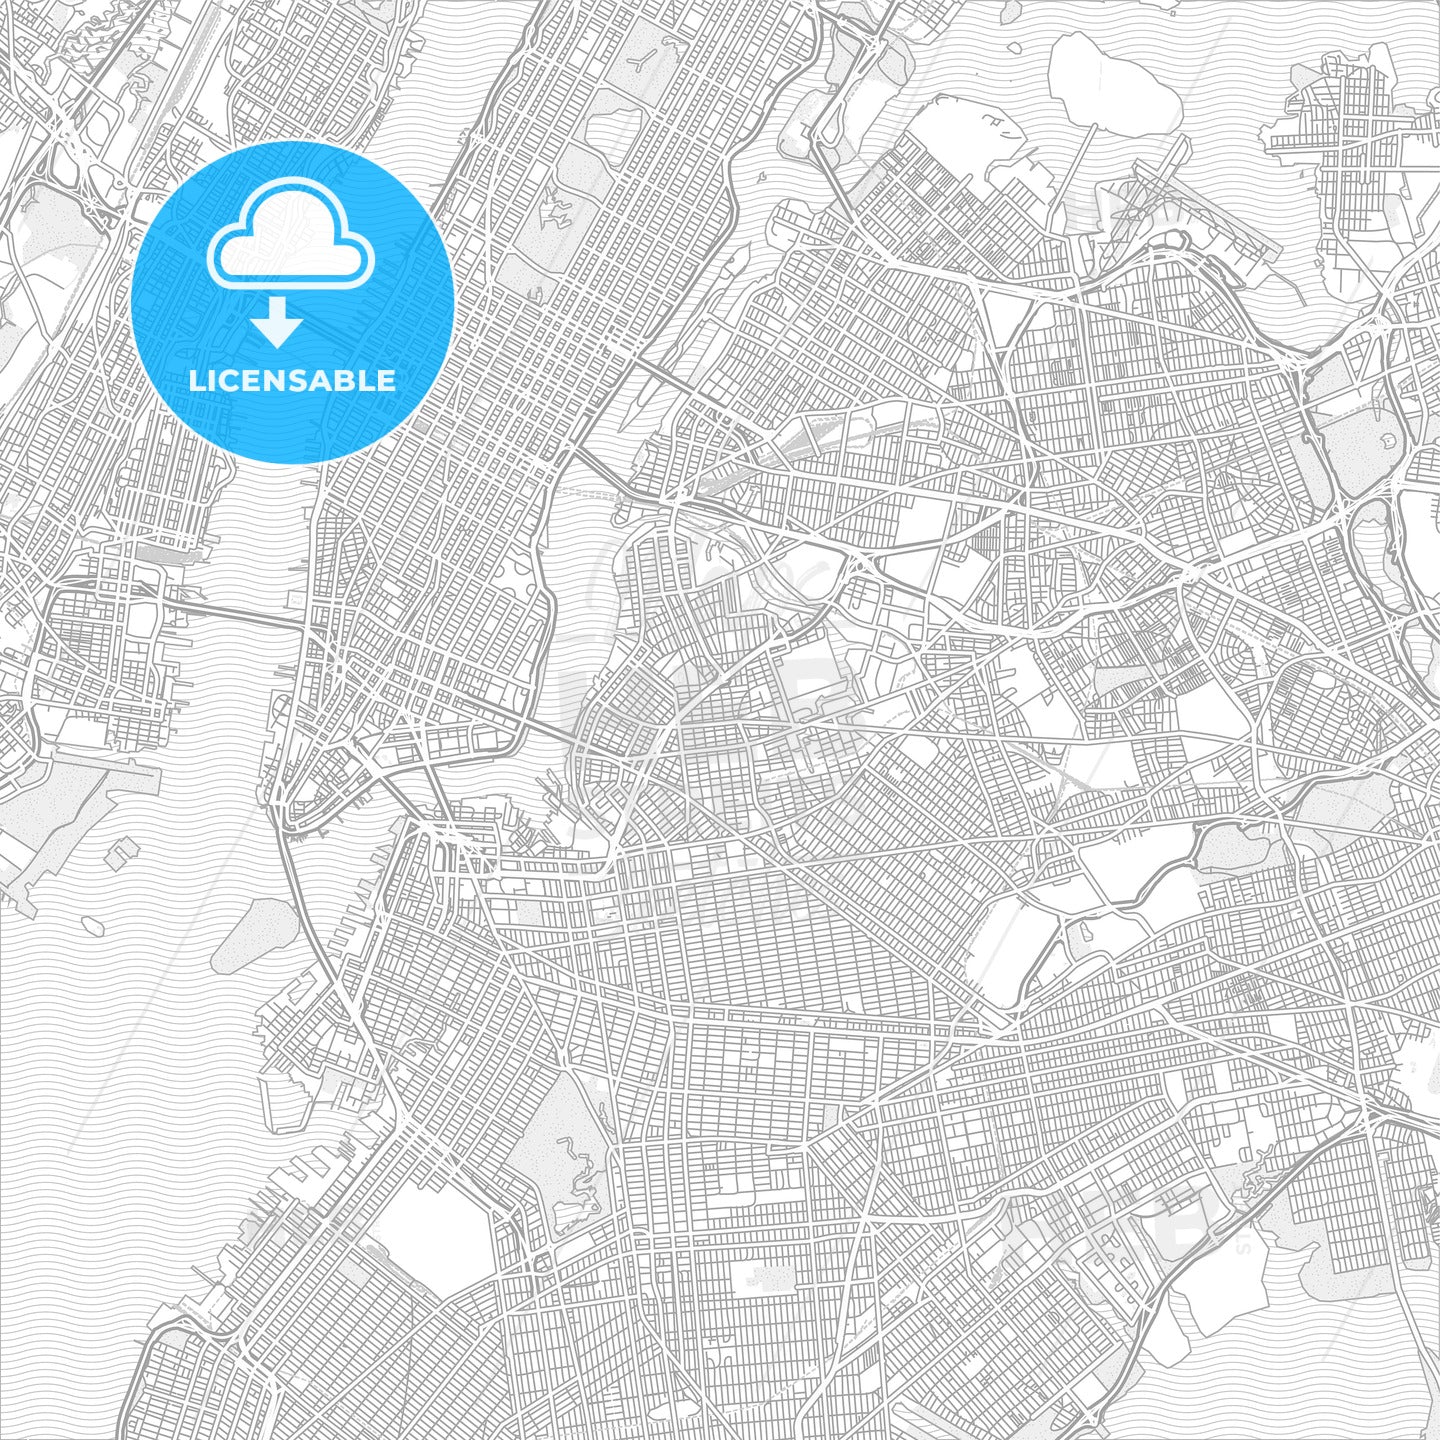 New York City, New York, USA, bright outlined vector map